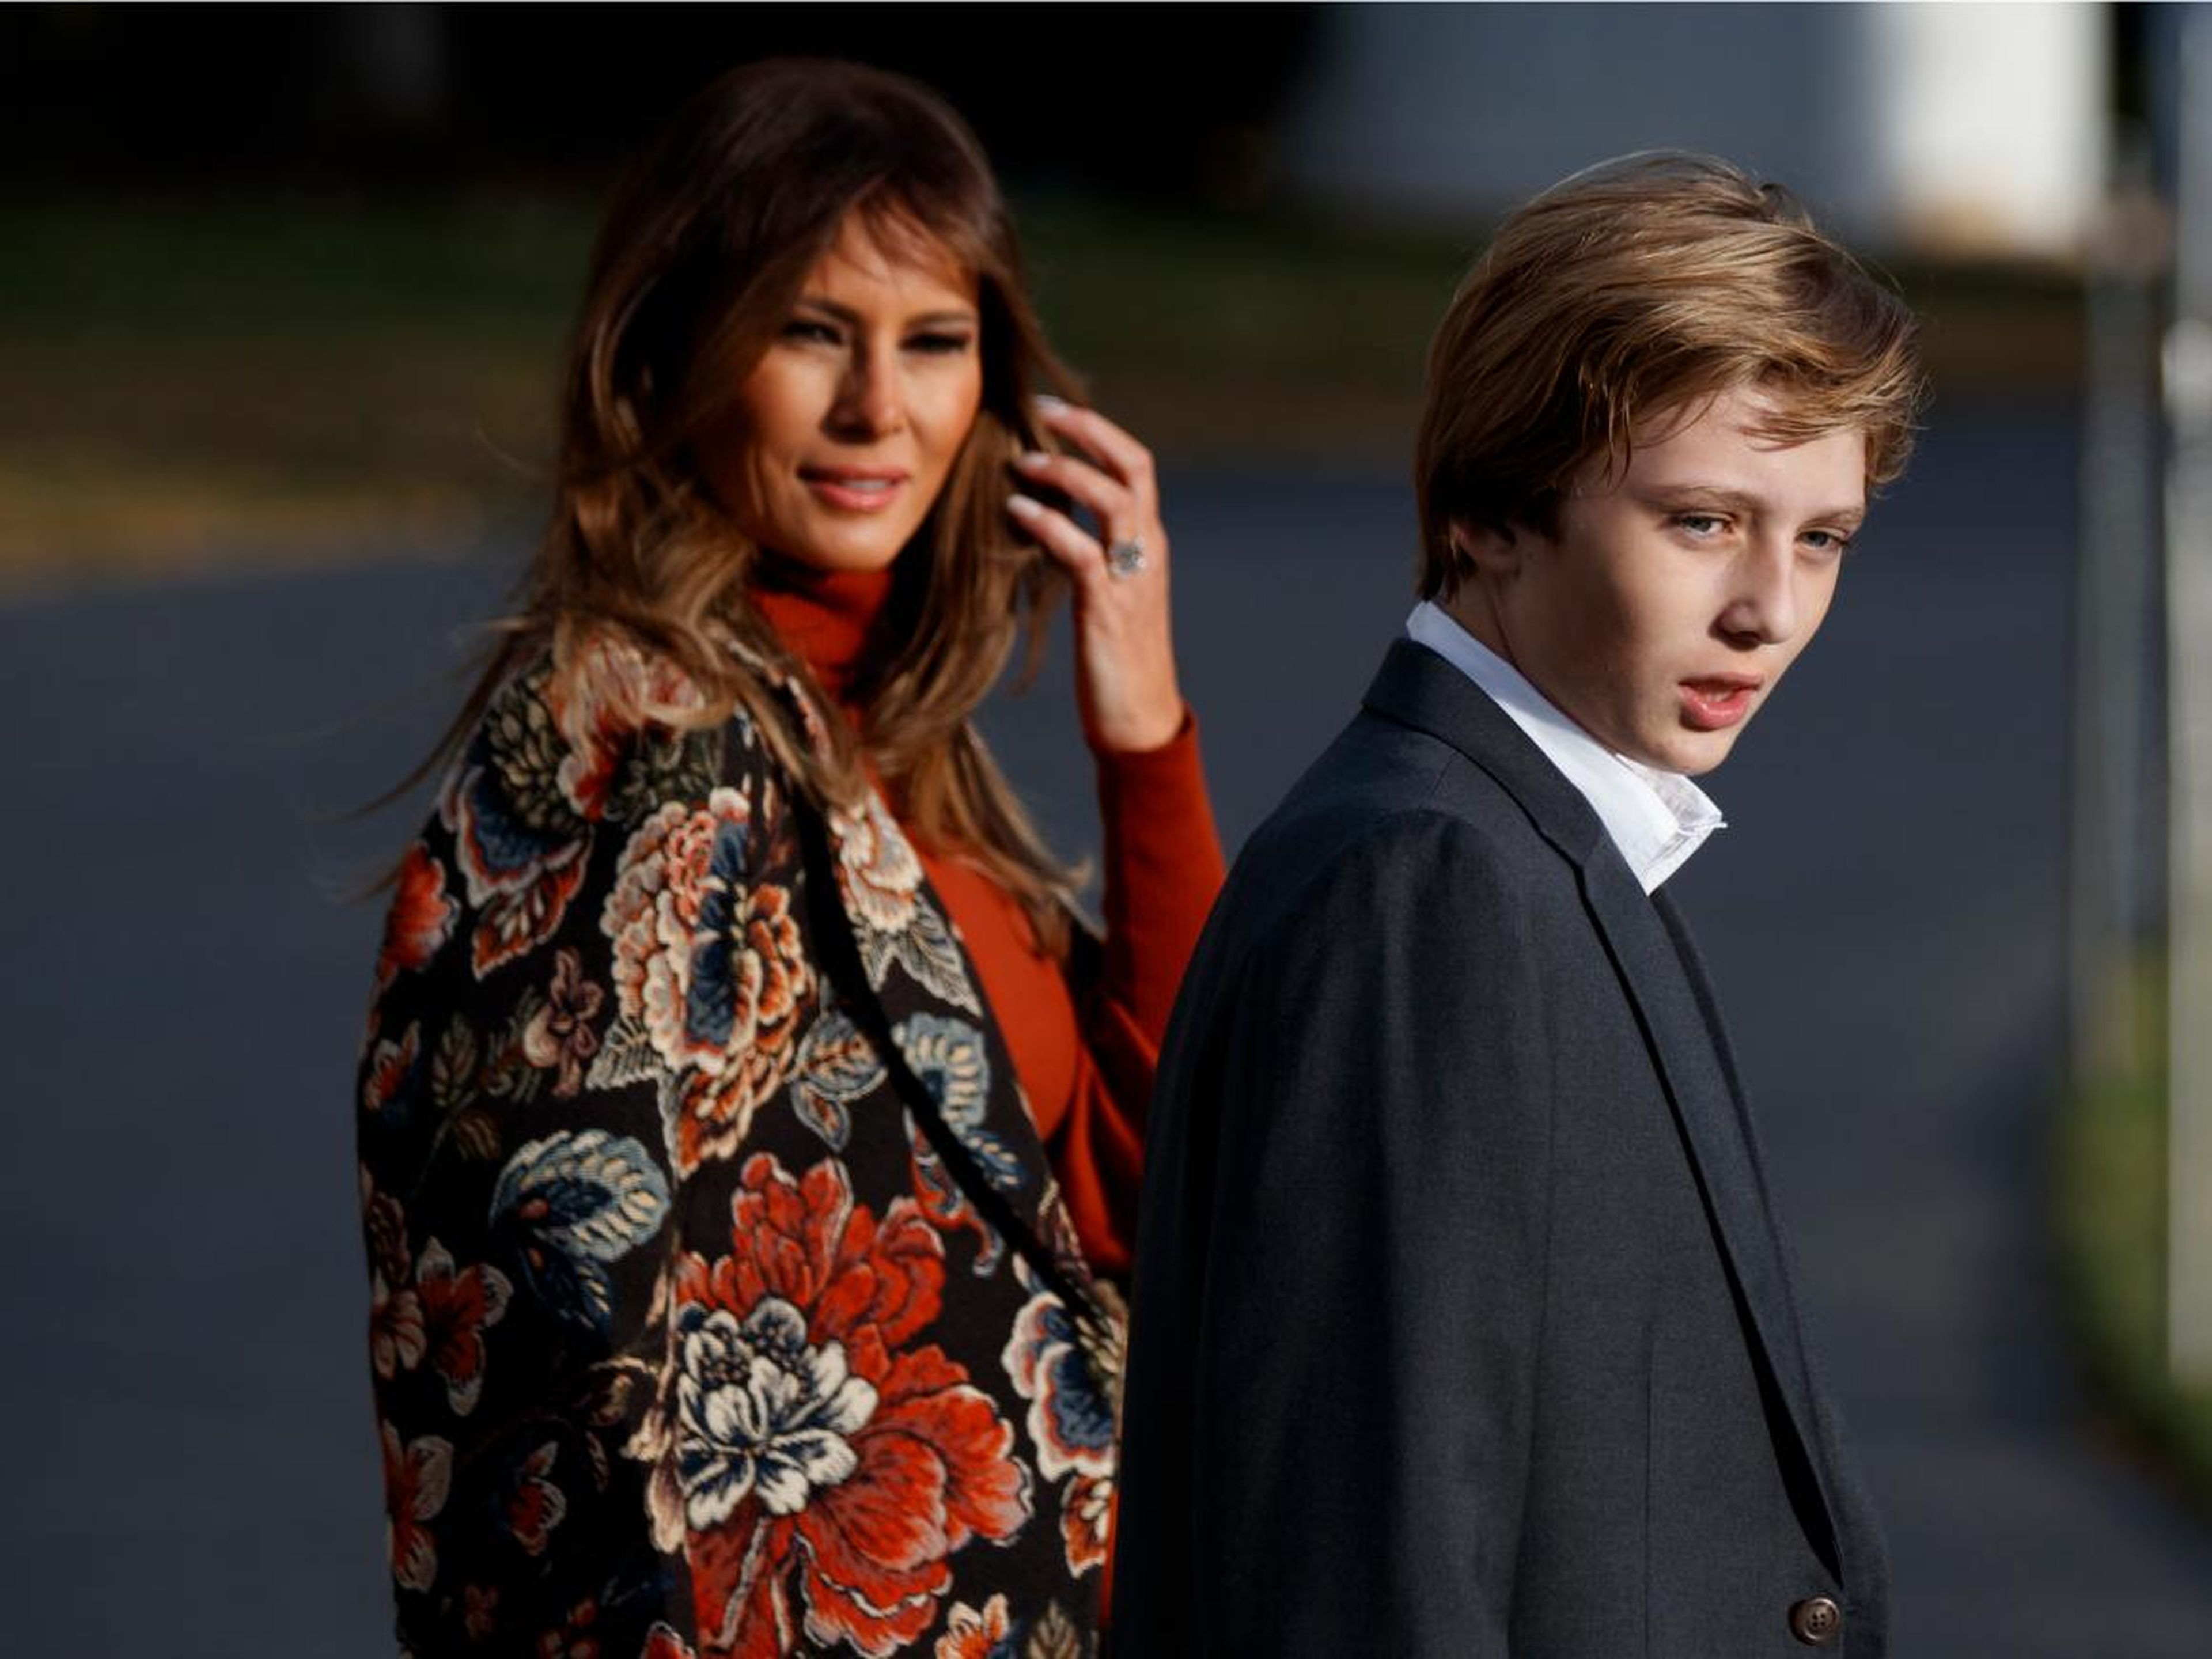 Melania is a full-time mom and likes to be hands-on, so she refuses to spend money on a nanny. She does indulge son Barron Trump in a lavish lifestyle, dressing him in suits and moisturizing him with her brand's Caviar Complex C6